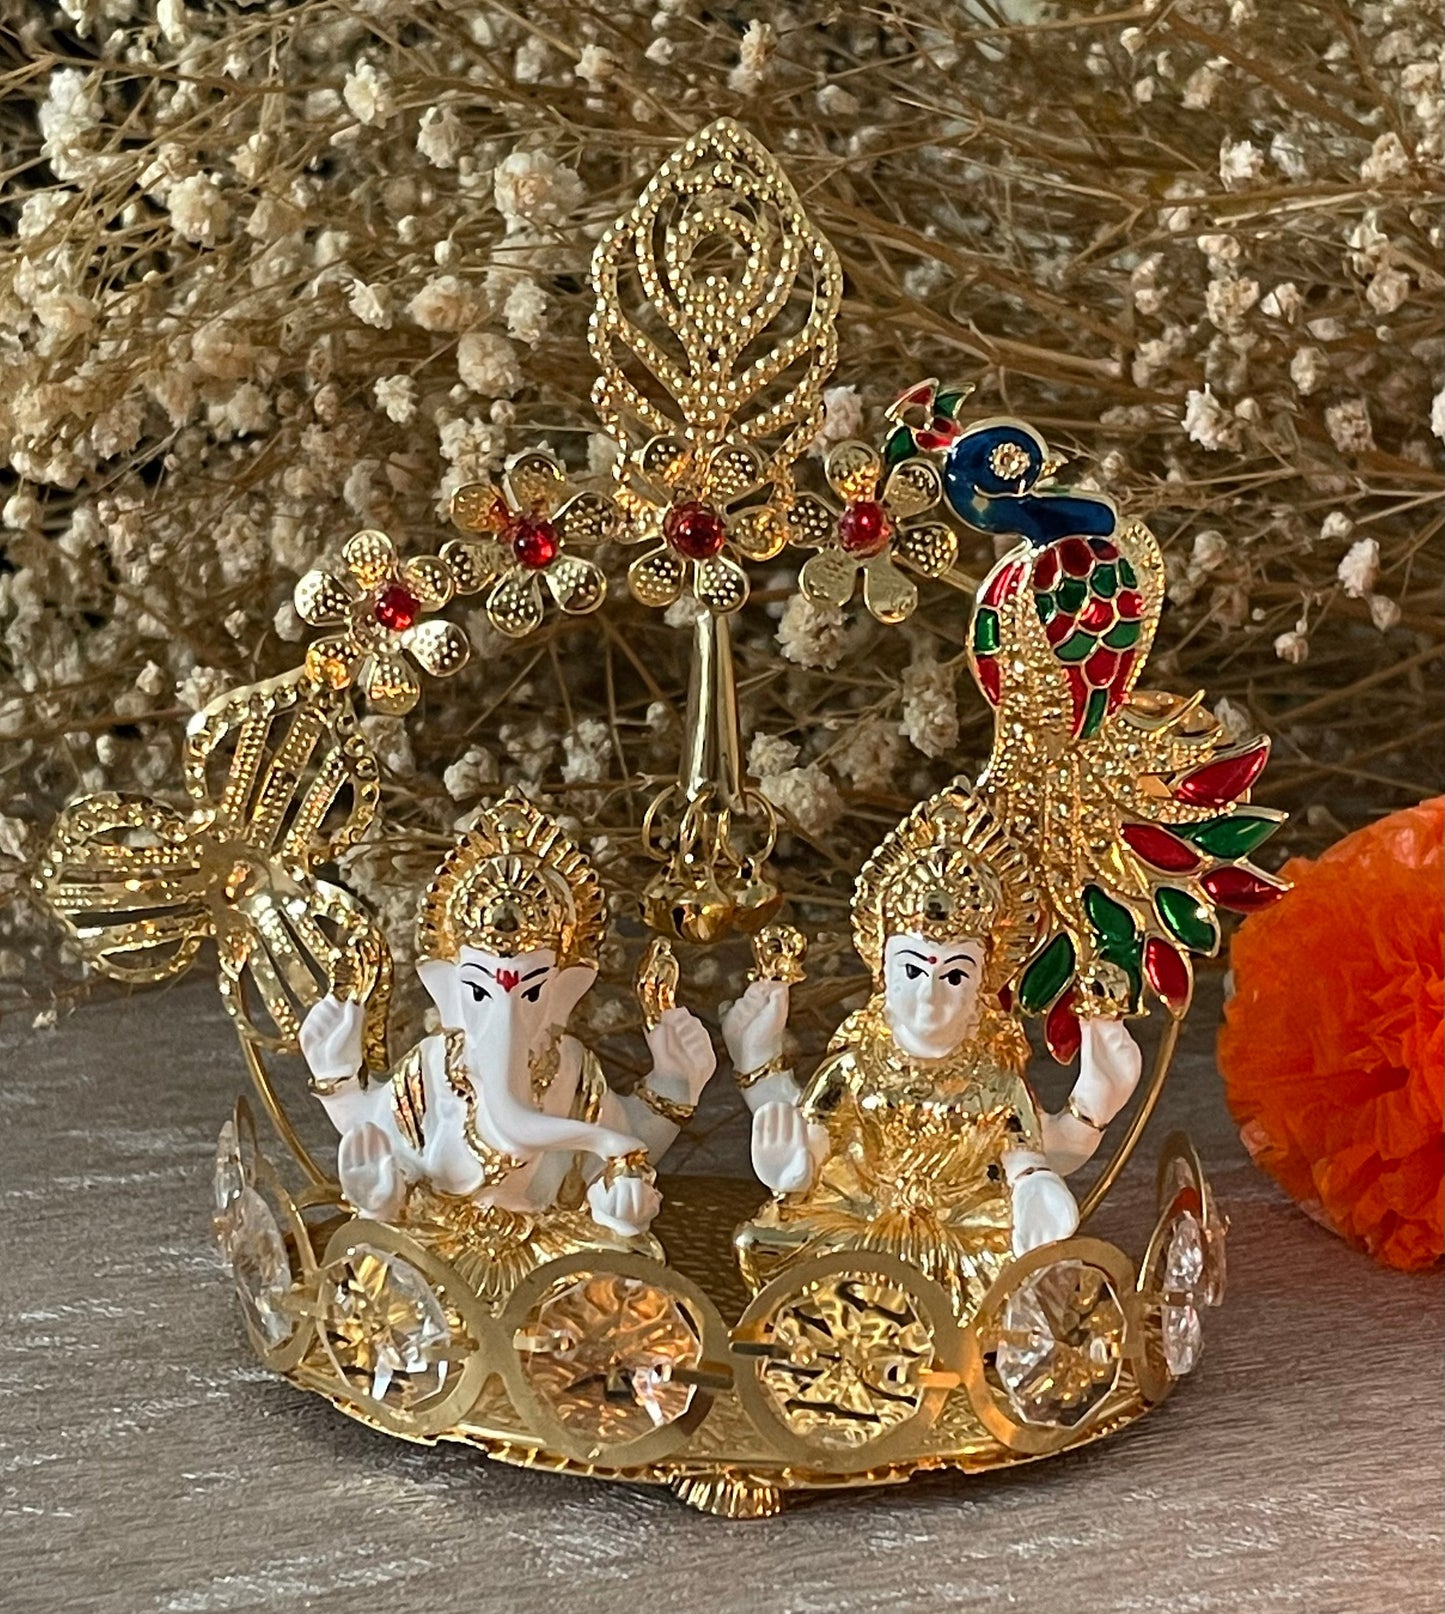 Lakshmi and Ganesh Figurines thumb size Sitting on on a Metal Decoration White Figurines with Golden plating accents Diwali Pooja Gifting